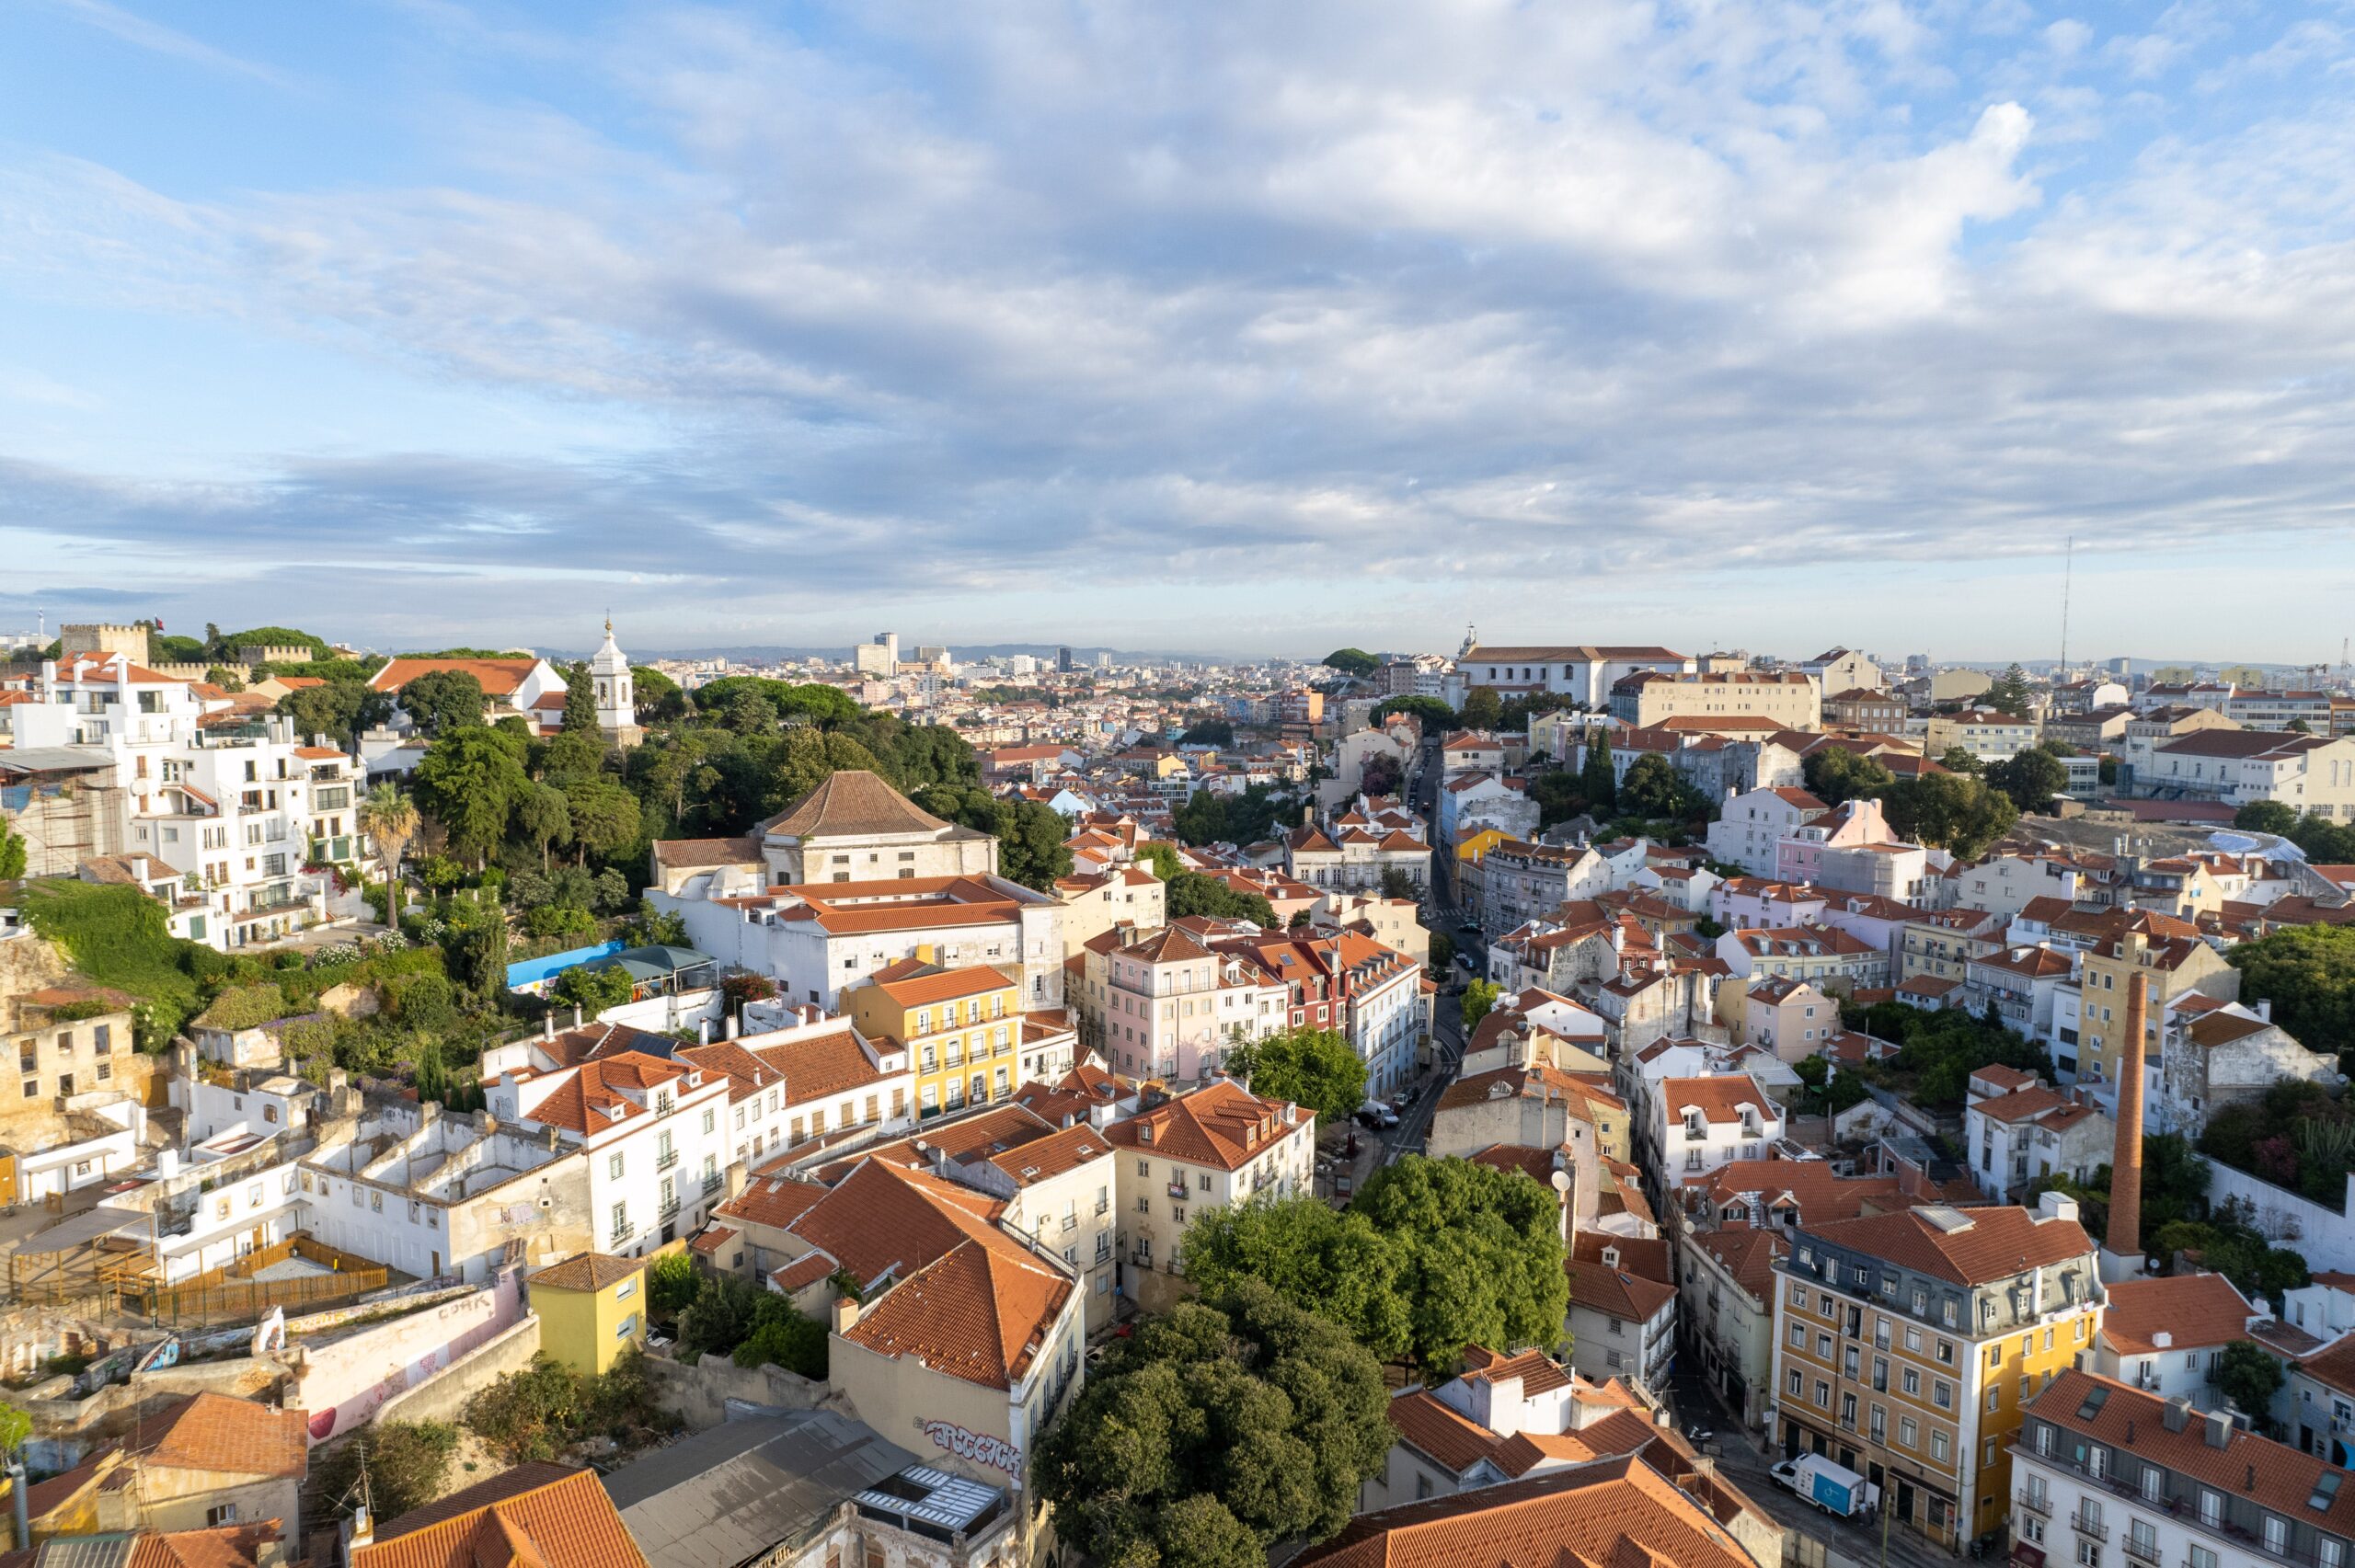 Panoramic view of Lisbon’s colorful architecture, a top budget-friendly warm winter destination for student travelers.